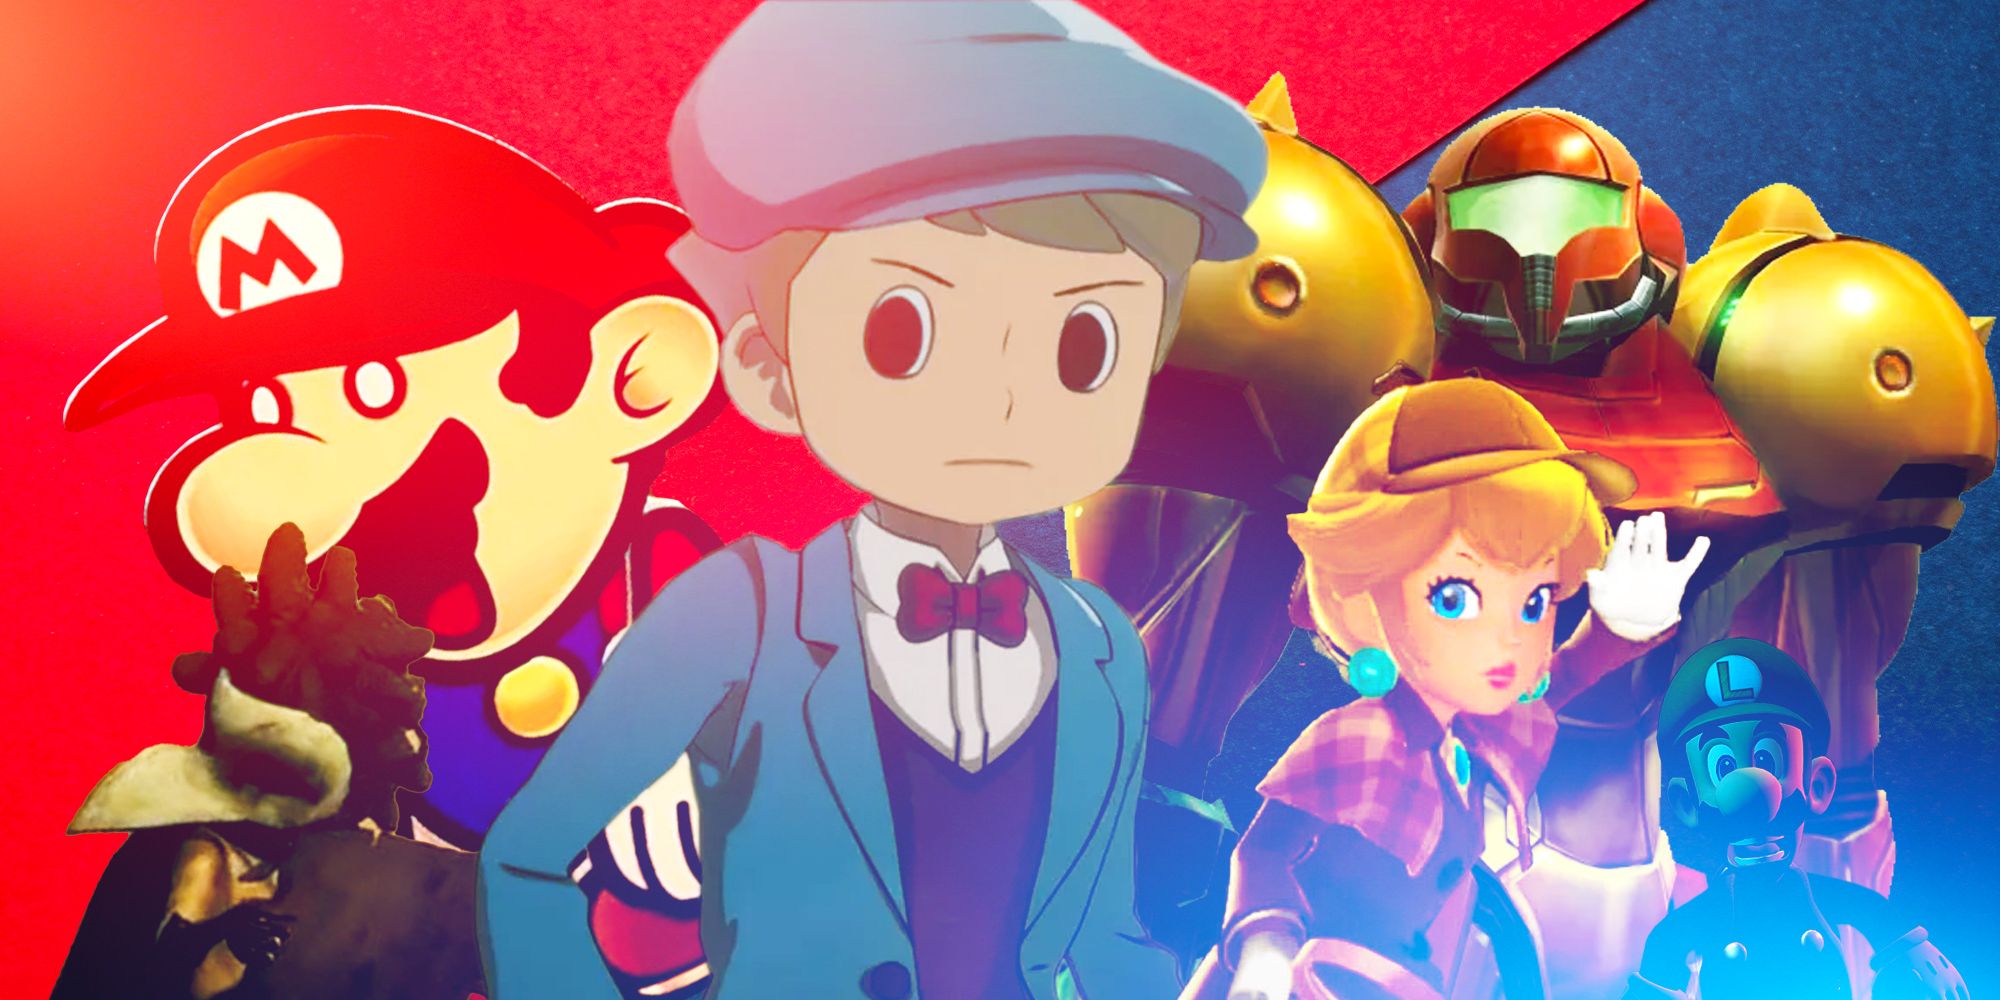 From left to right over a red and blue background, Little Nightmares 3, Paper Mario, Professor Layton, Metroid Prime, Princess Peach, and Luigi's Mansion